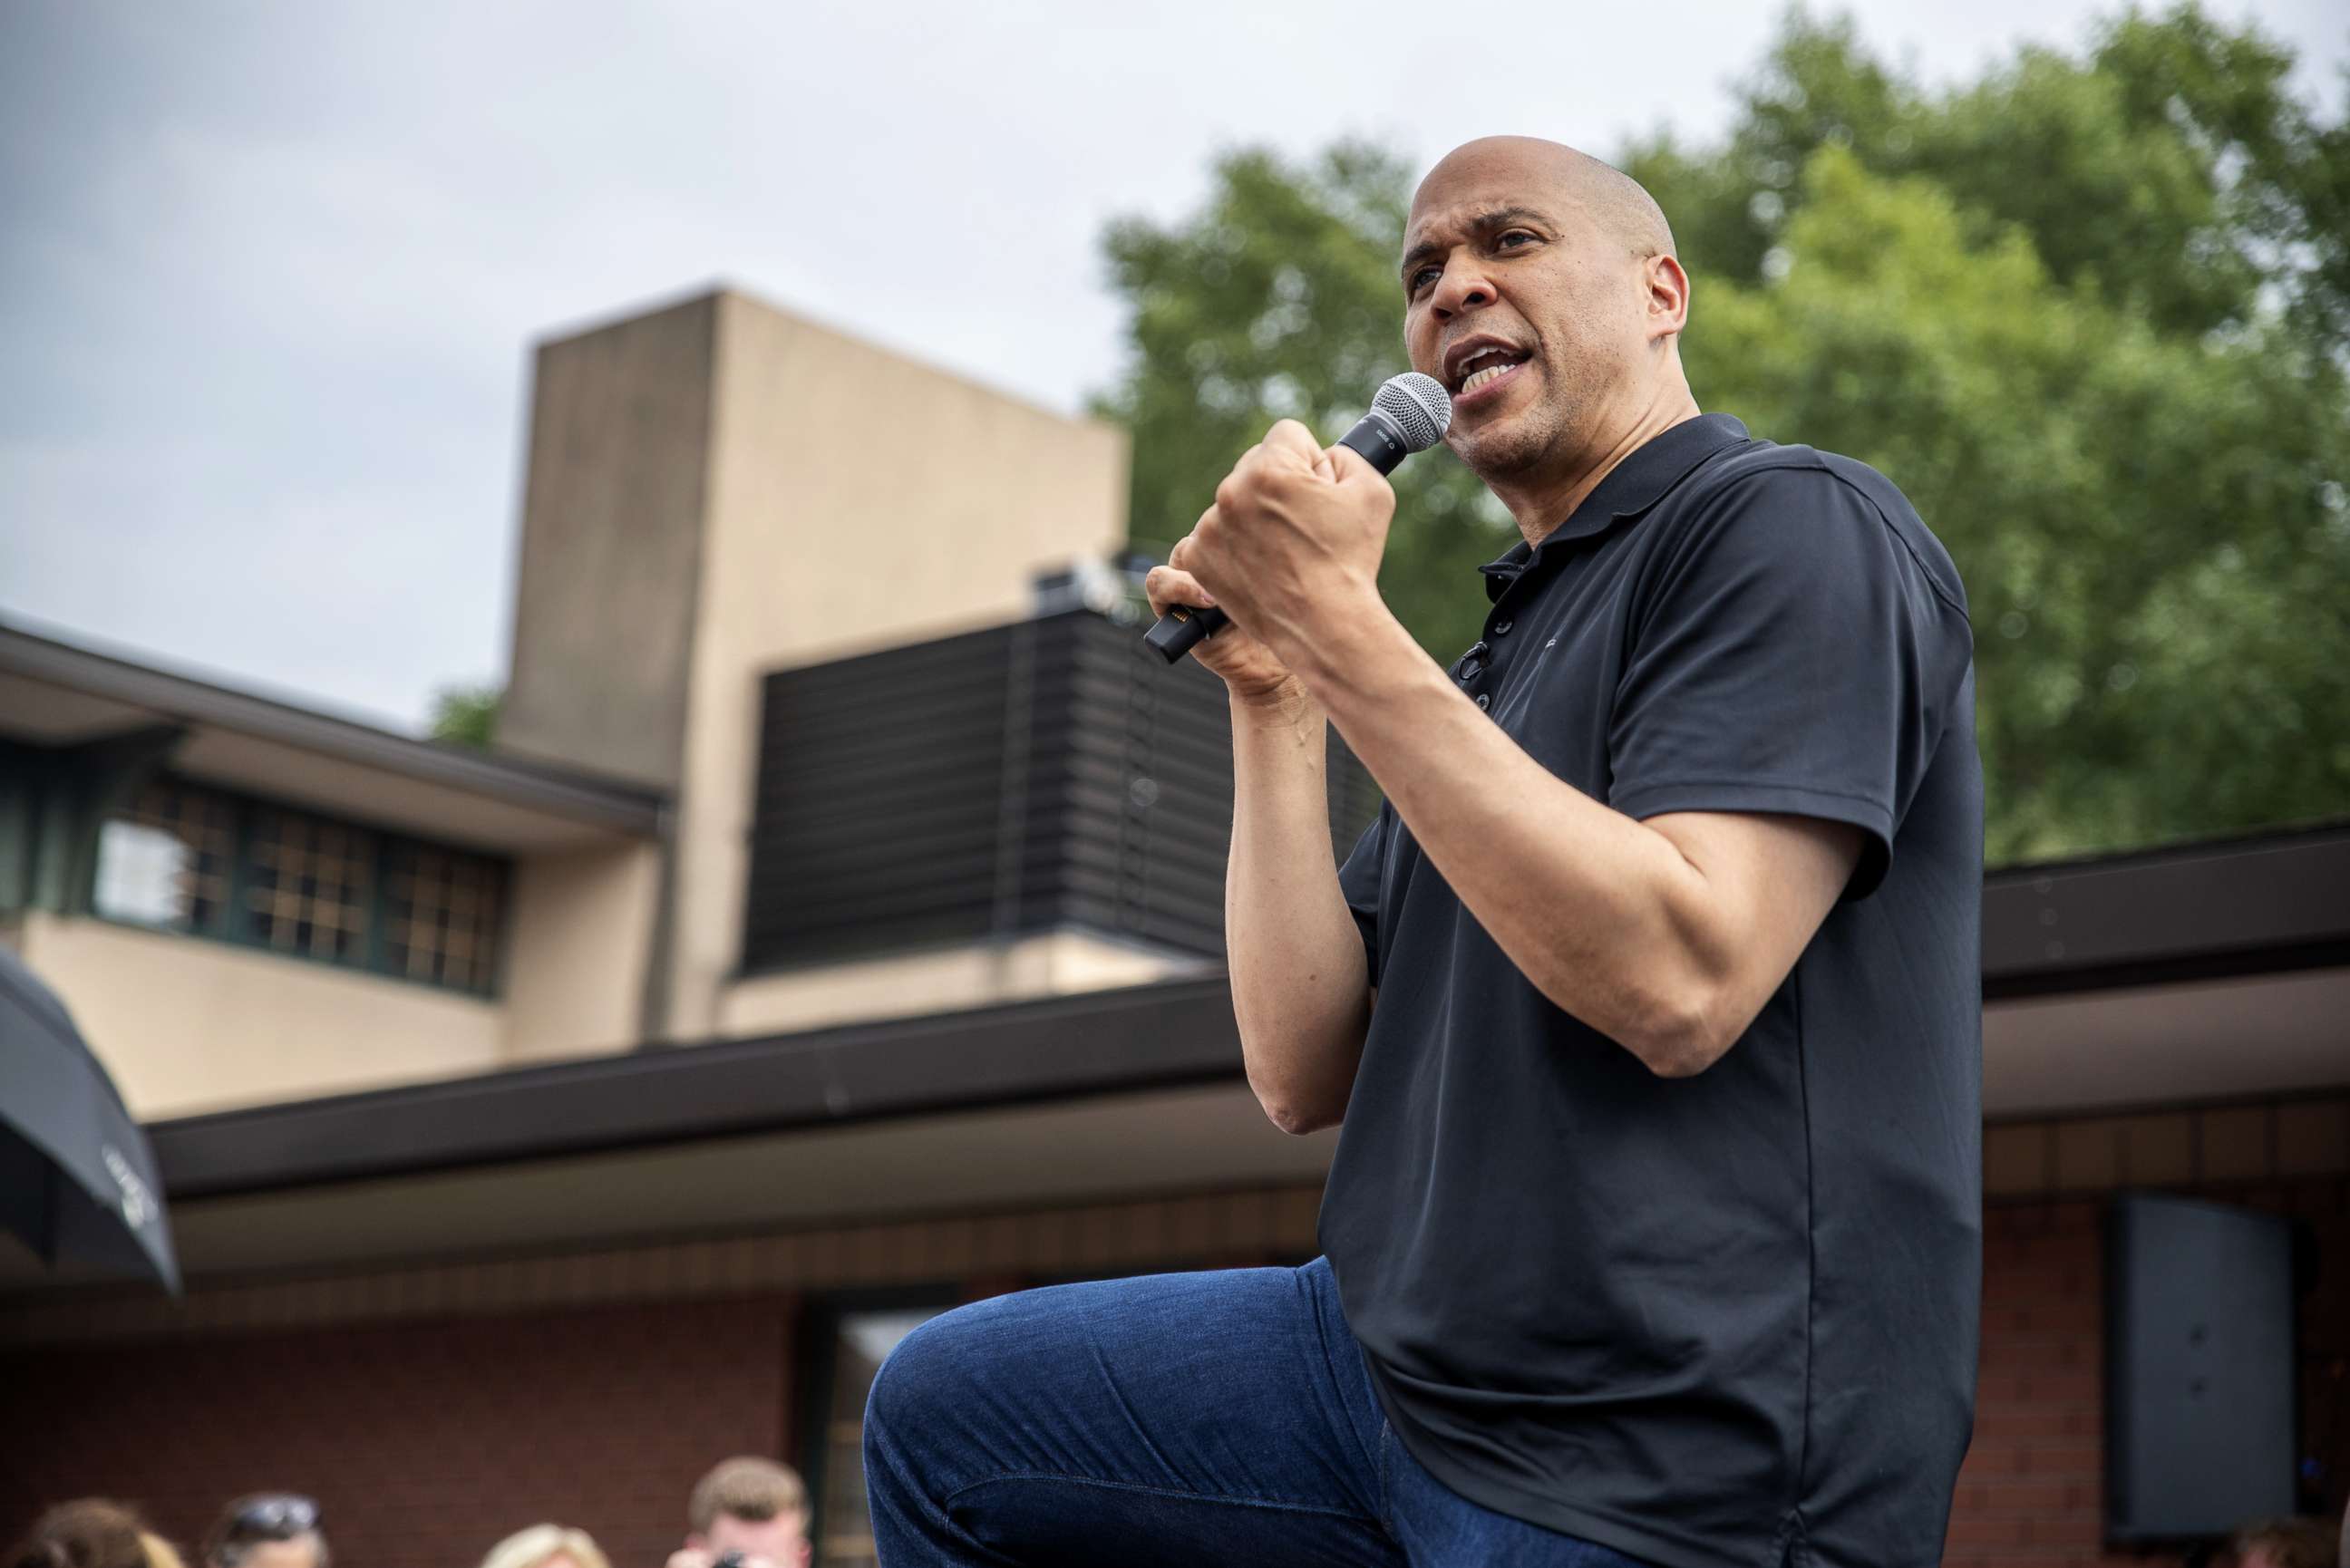 PHOTO: Democratic presidential candidate U.S. Sen. Cory Booker (D-NJ) speaks to a crowd at the Iowa State Fair, Aug. 10, 2019, in Des Moines, Iowa.